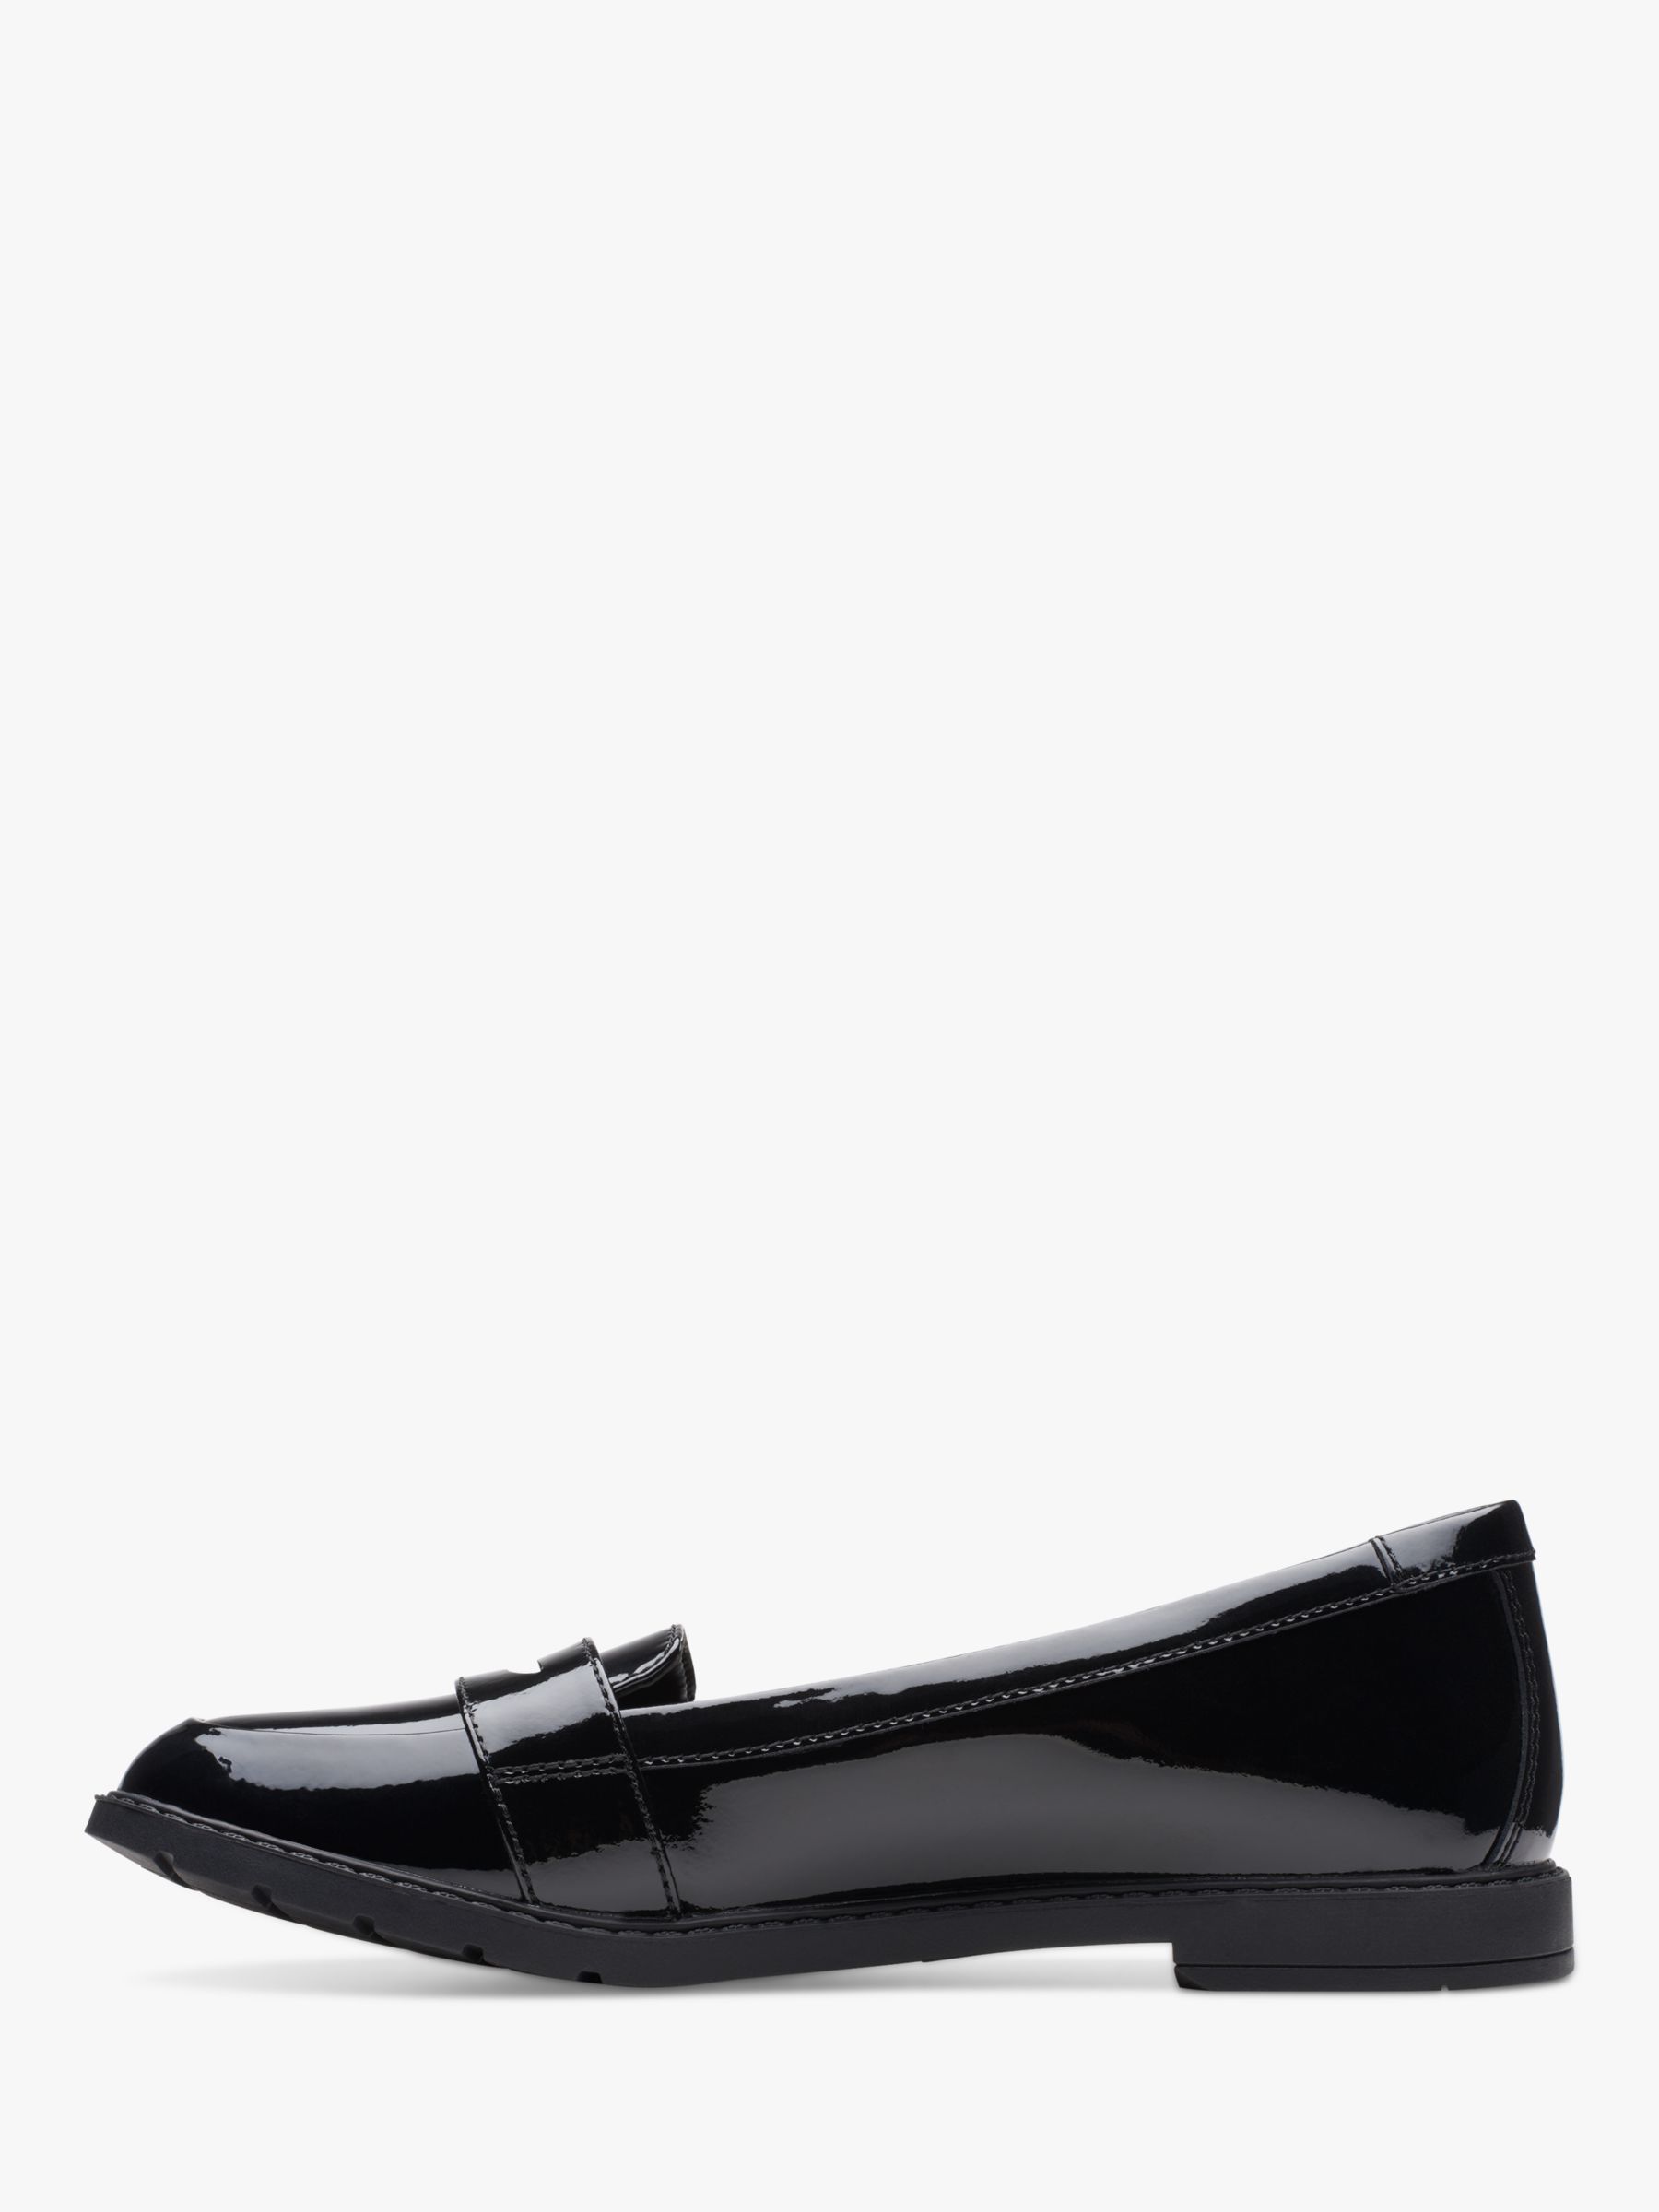 Clarks Kids' Scala Loafer School Shoes at John Lewis & Partners